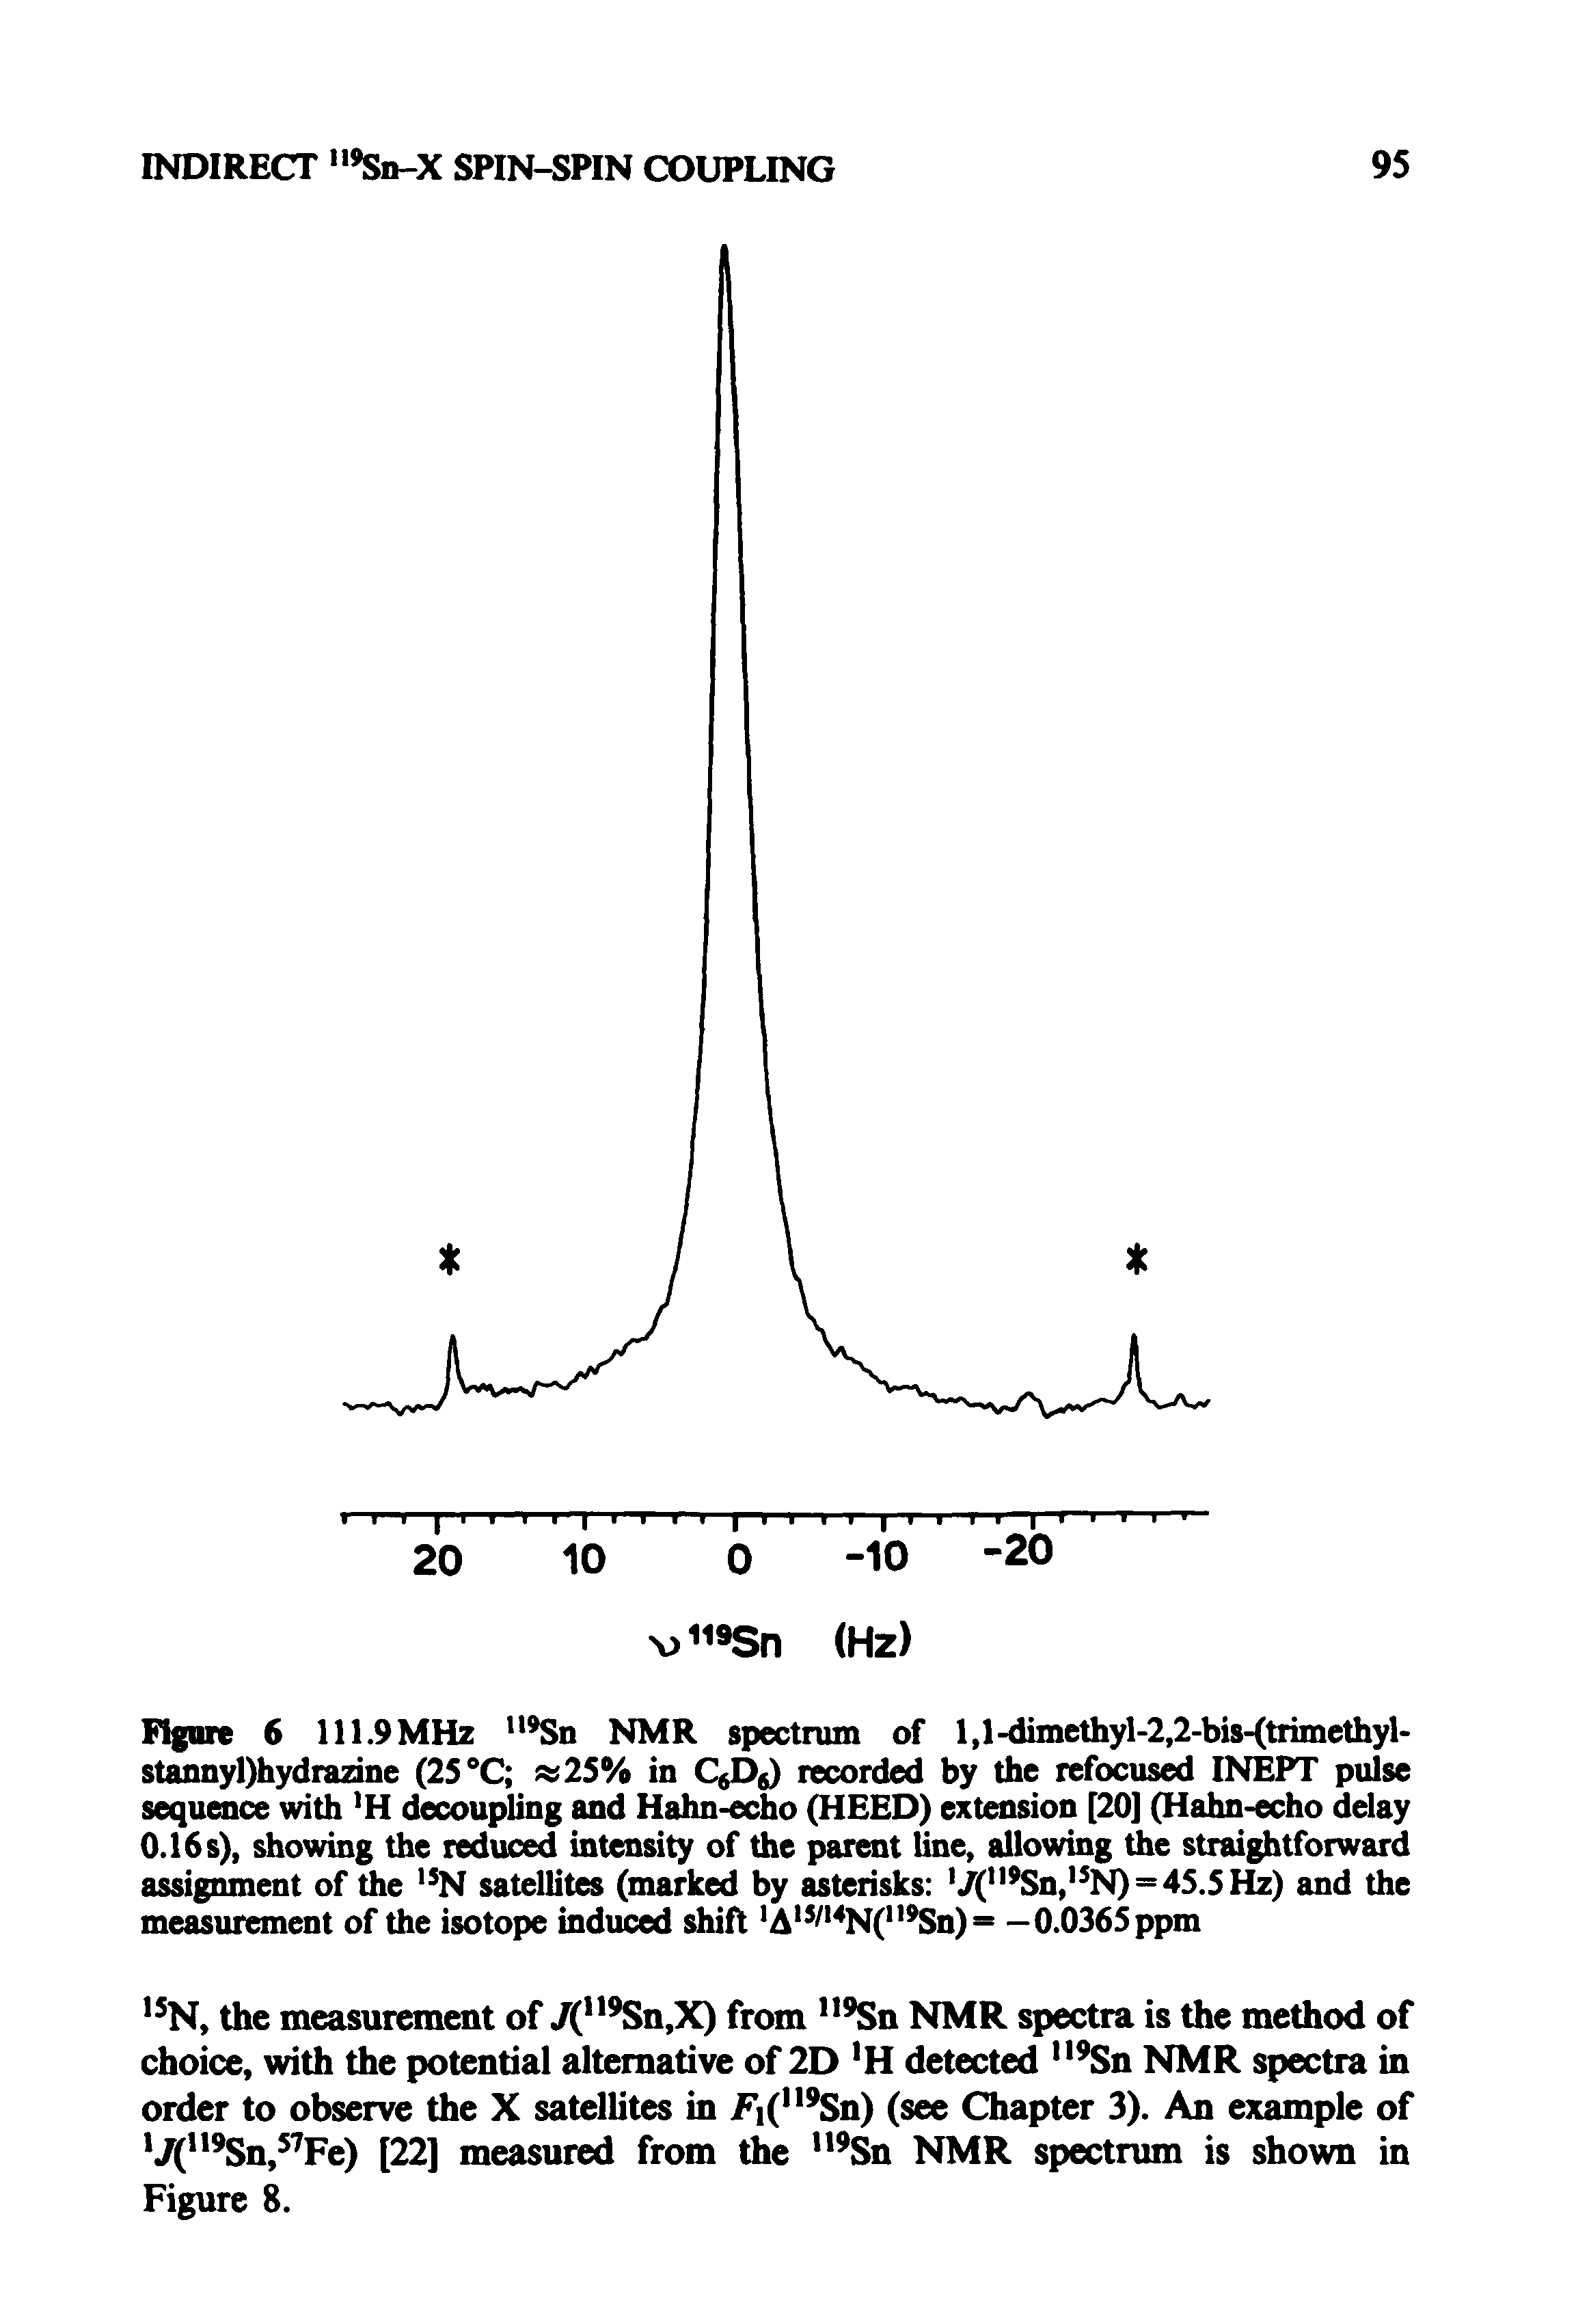 Figure 6 111.9MHz Sn NMR spectrum of l,l-dimethyl-2,2-bis-(trimcthyl-stannyl)hydrazine (2S°C 2S% in C () recorded by the refocused INEPT pulse sequence with H decoupling and Hahn-echo (HEED) extension [20] (Hahn-echo delay 0.16 s), showing the reduced intensity of the parent line, allowing the straightforward assignment of the N satellites (marked by asterisks /(" Sn, N)=4S.SHz) and the measurement of the isotope induced shift A / N(" Sn) = —0.0365 ppm...